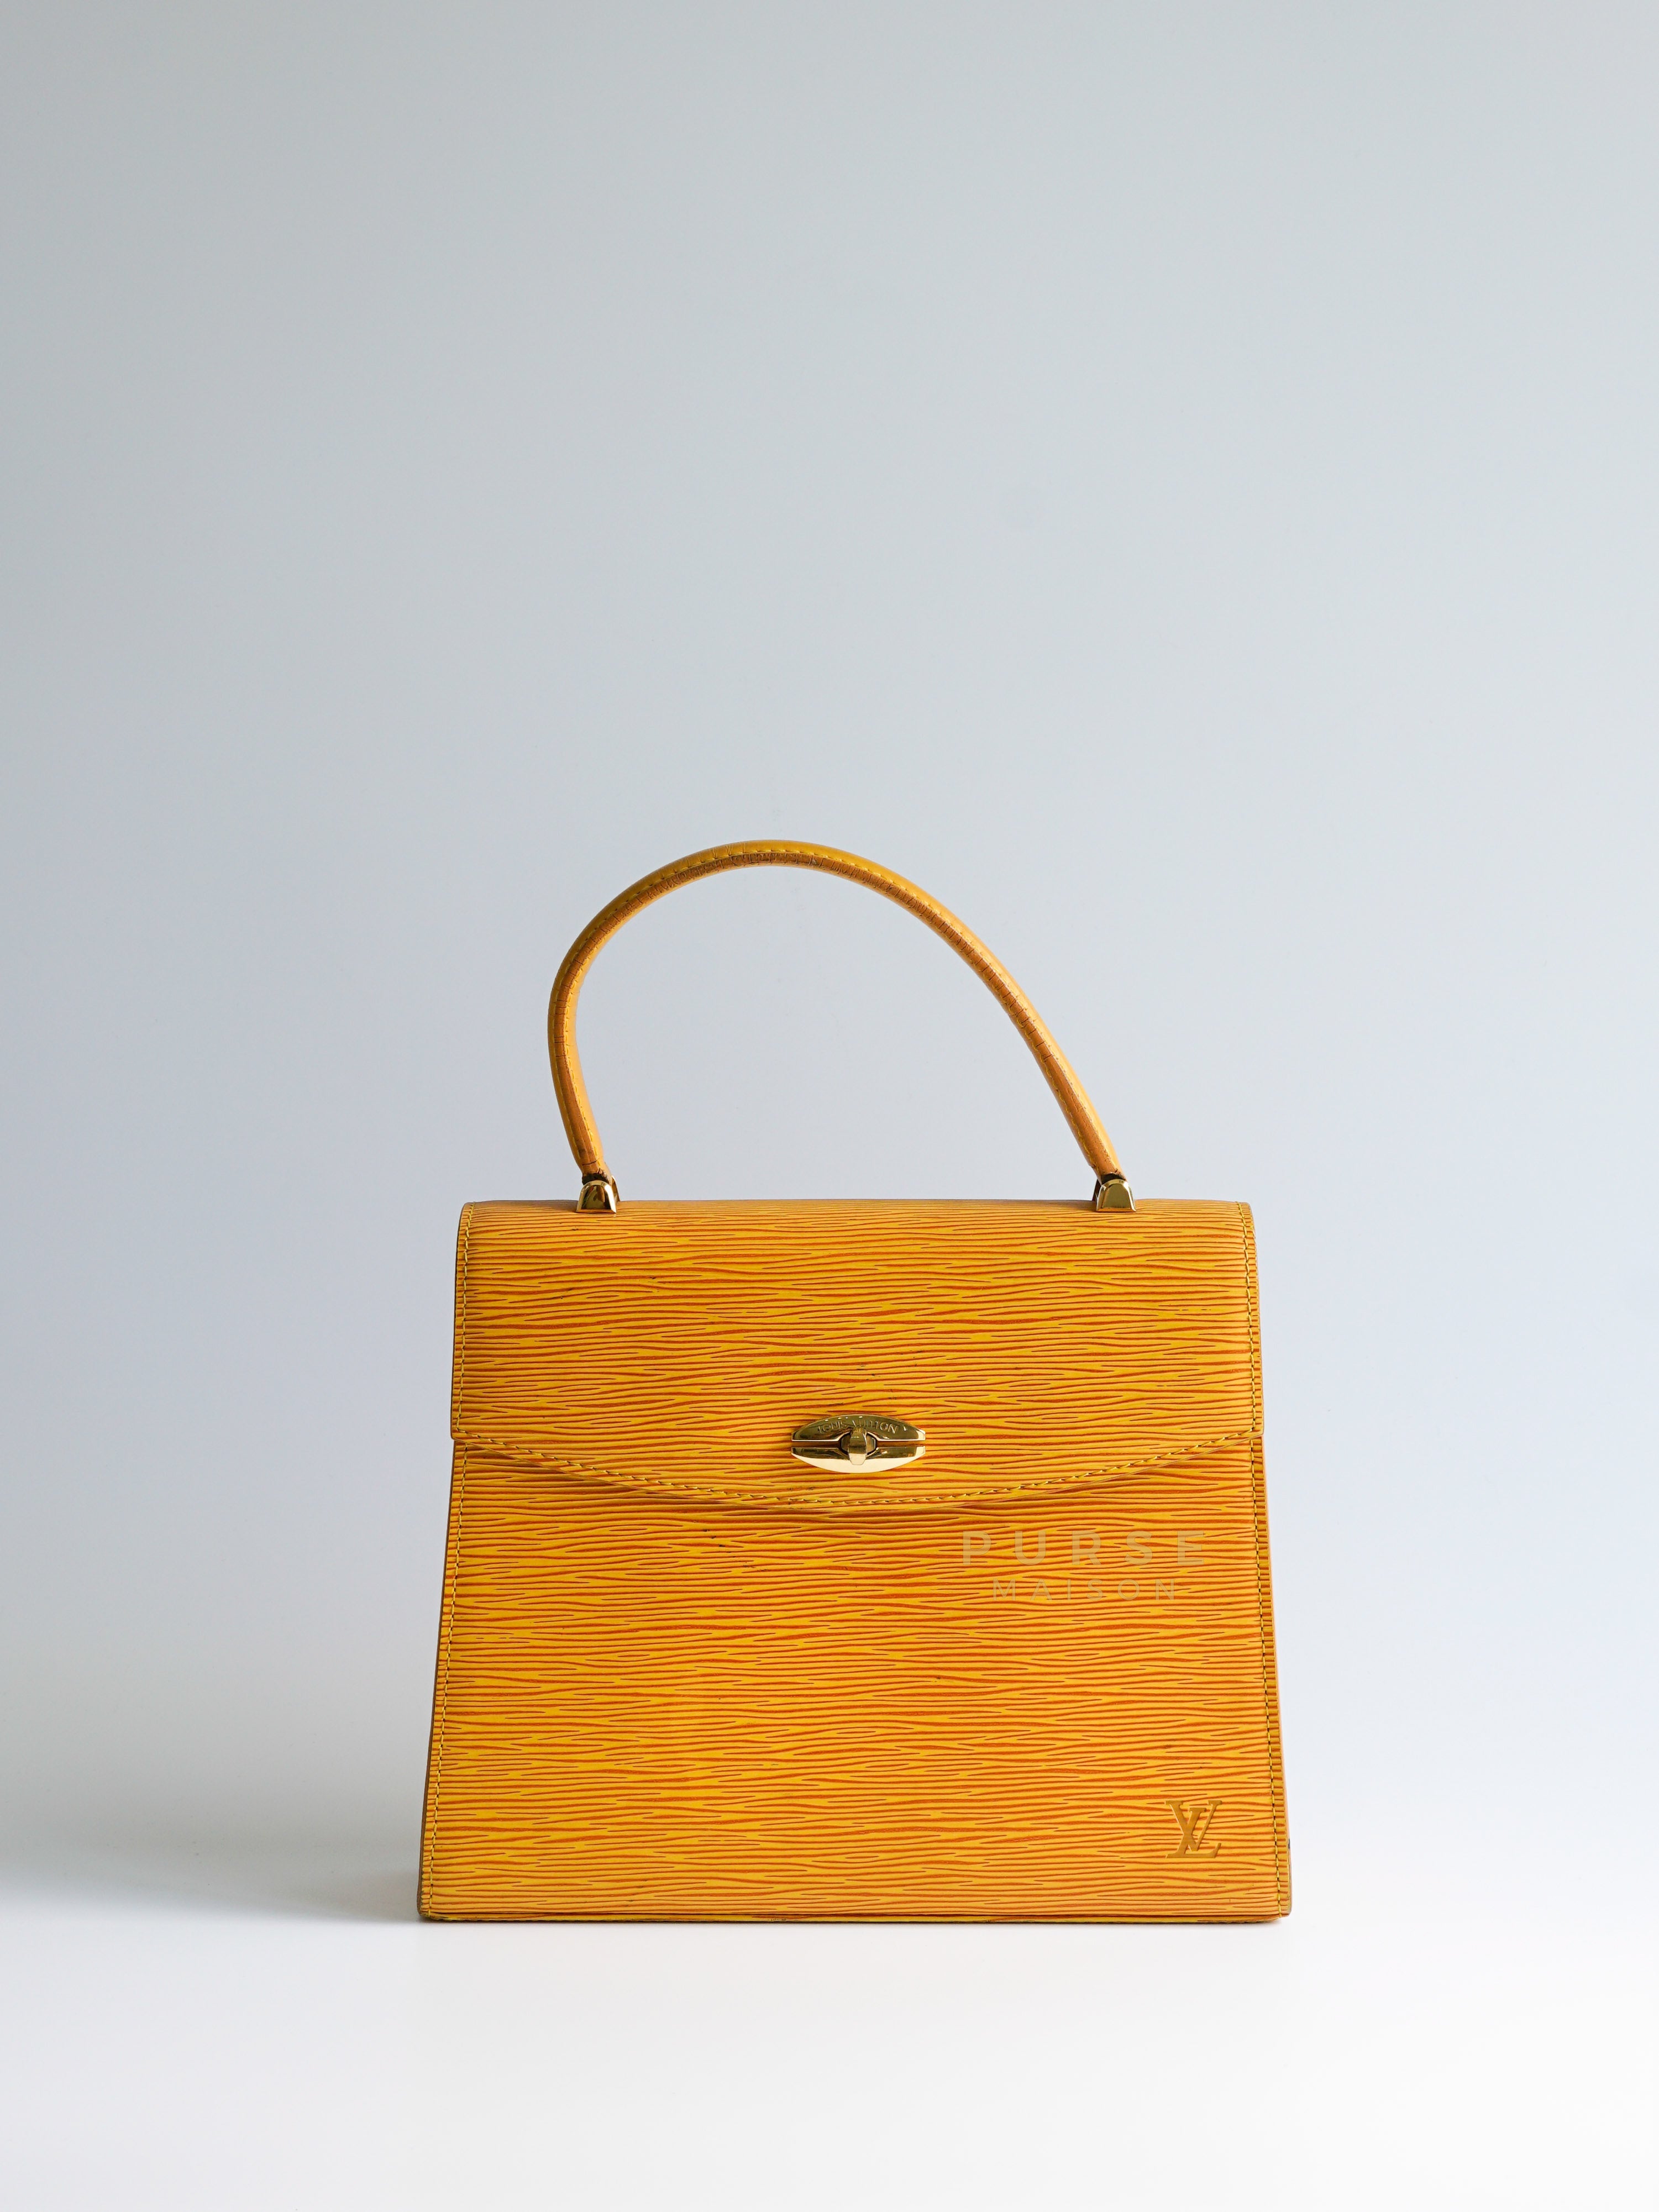 Malesherbes in Yellow Epi Leather Hand Bag (Date Code: MI0924) | Purse Maison Luxury Bags Shop